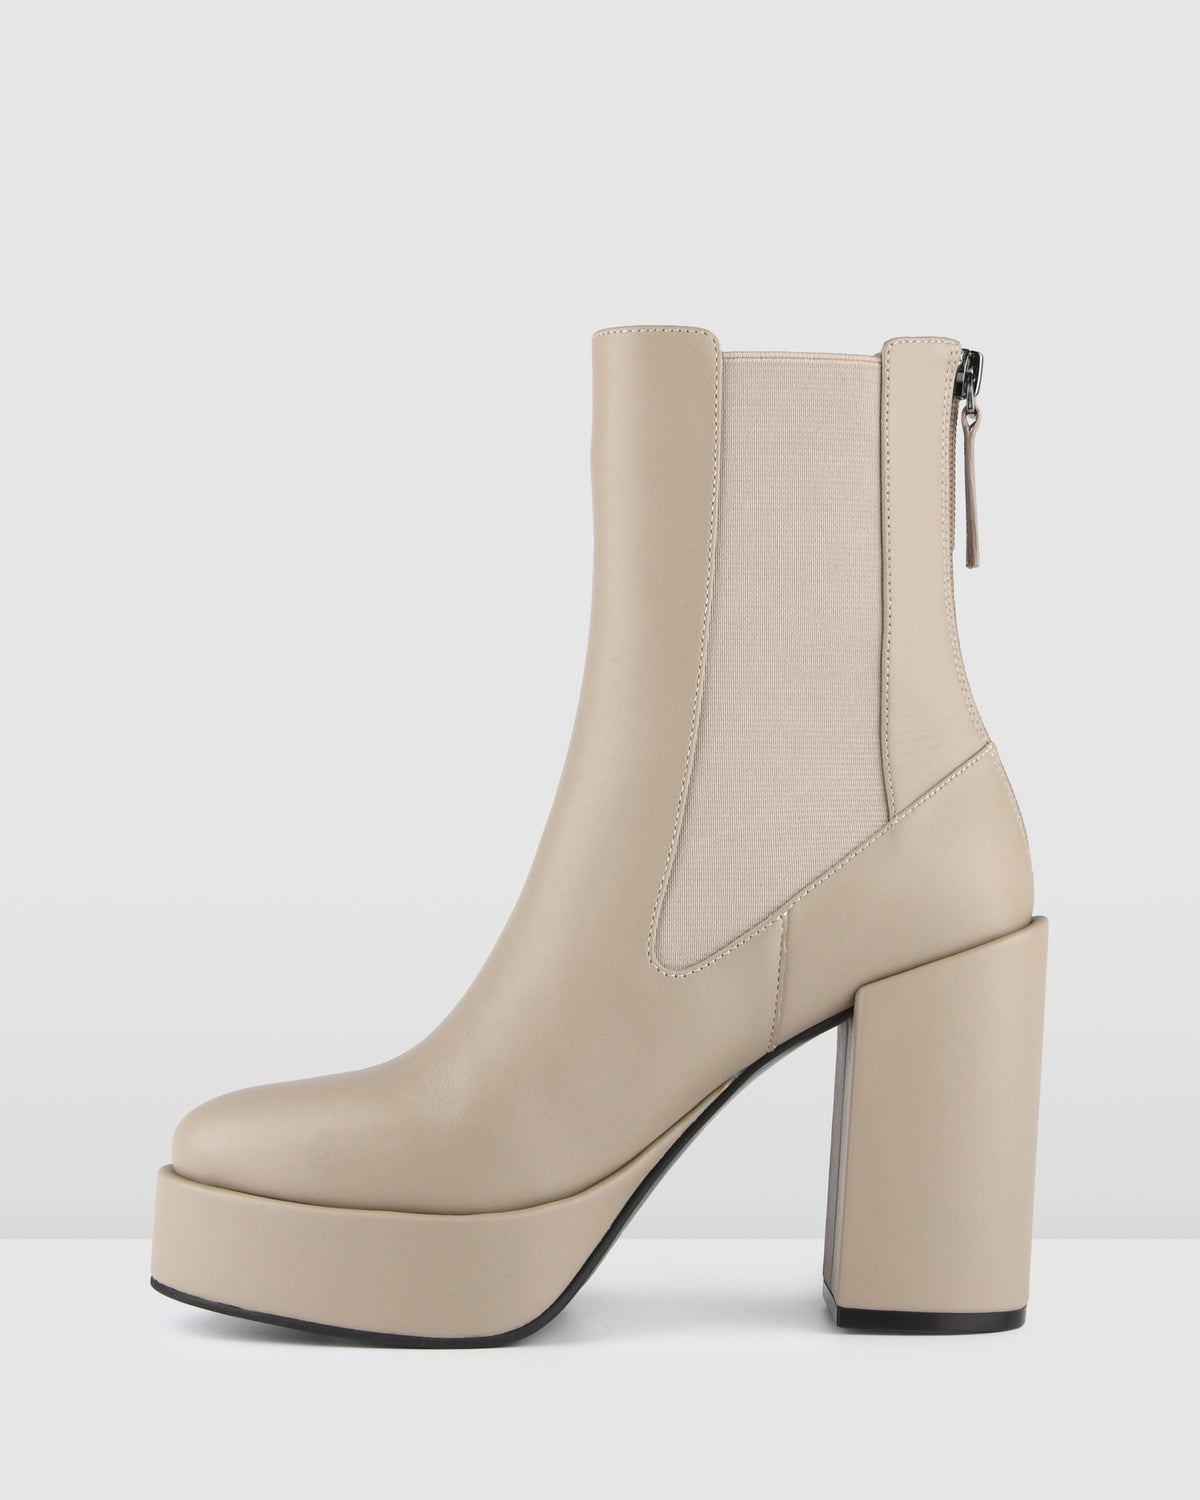 EMMA HIGH PLATFORM ANKLE BOOTS TAUPE LEATHER